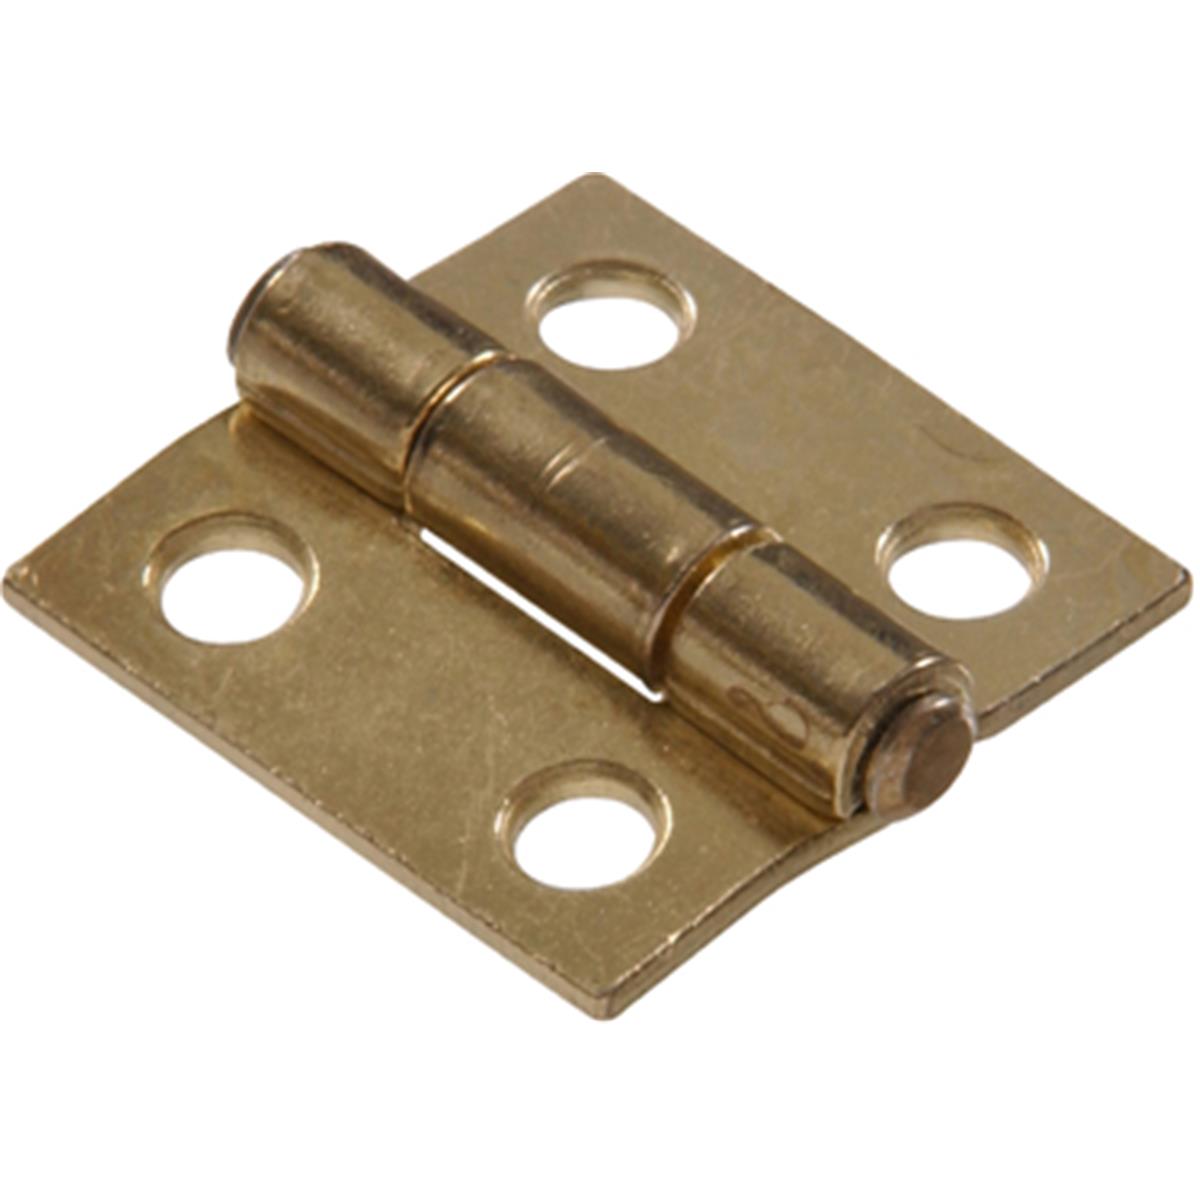 1.5 In. Light Narrow Hinge Fixed Pin, Brass Plated